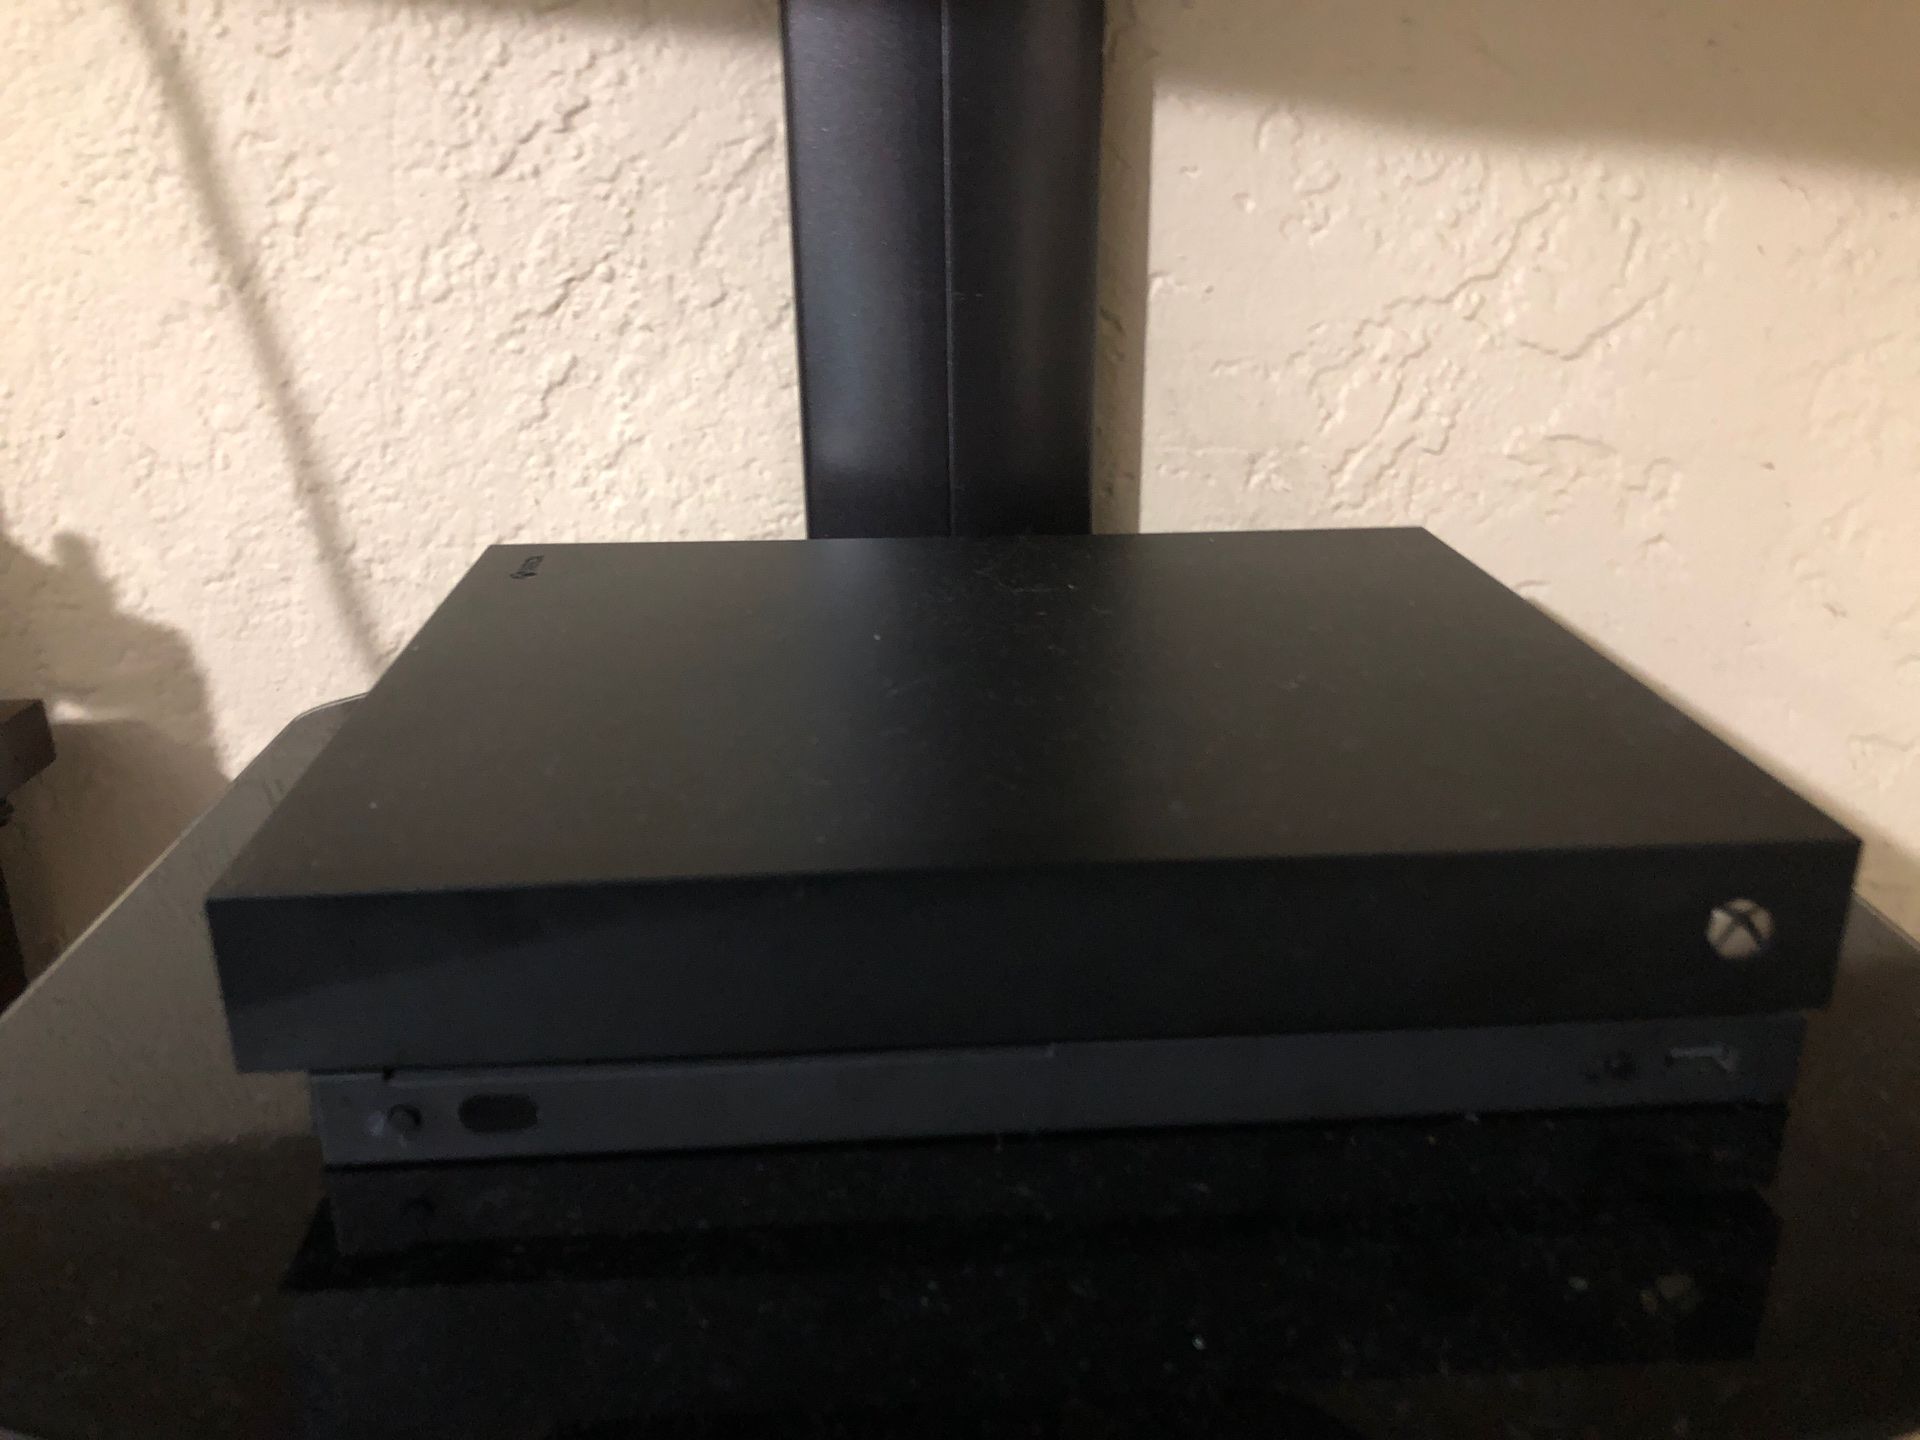 Xbox one x with 2 controllers